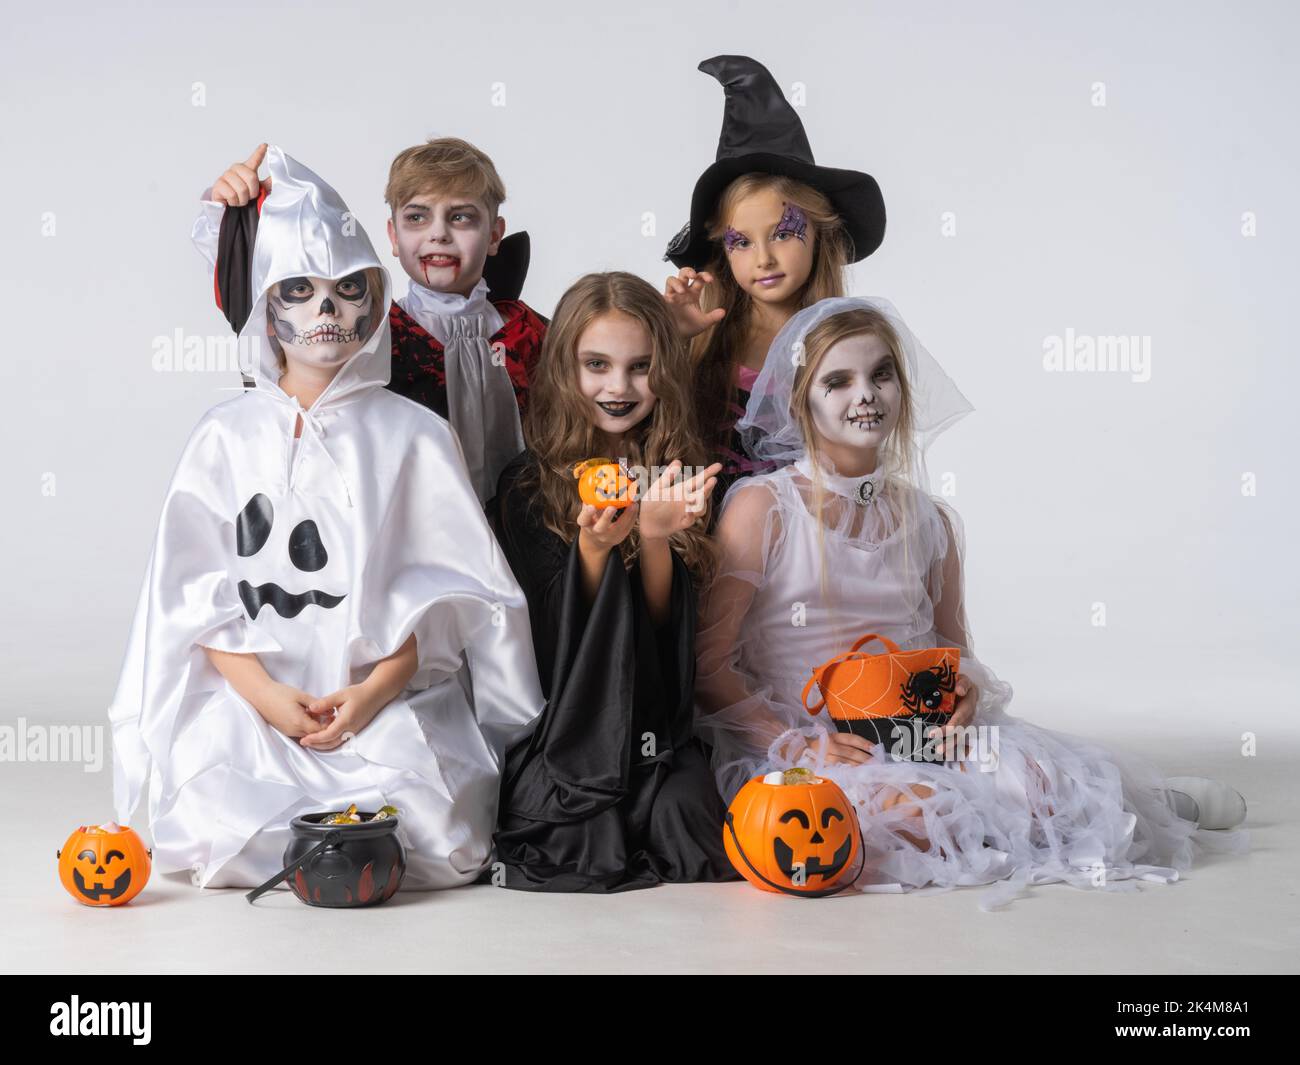 Group of children in costumes holding sweets at Halloween party Stock Photo